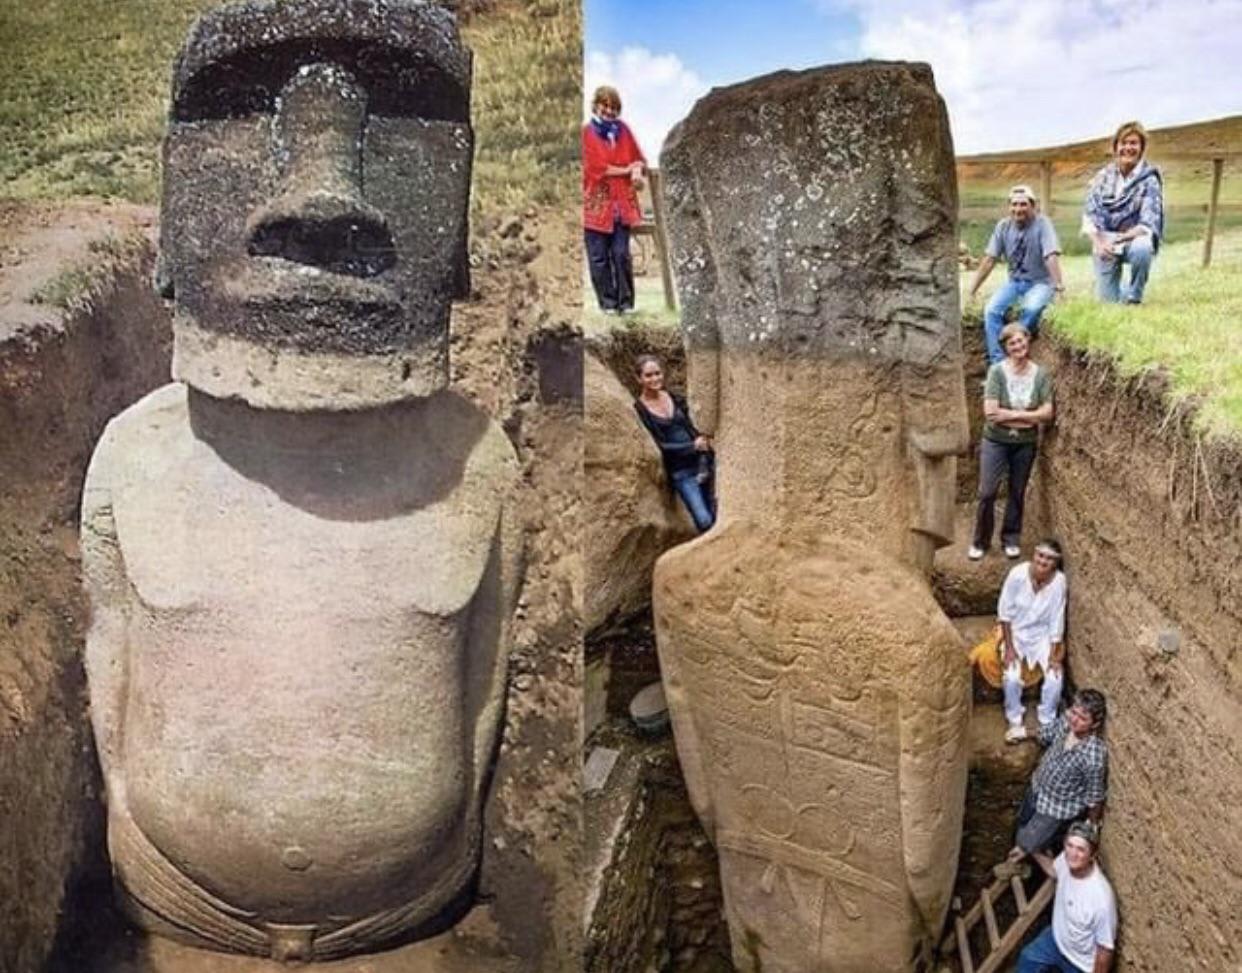 The buried bodies of the iconic Easter Island moai basalt statues, built by the Rapa Nui people between 1250-1500 CE, with petroglyphs carved on their back.